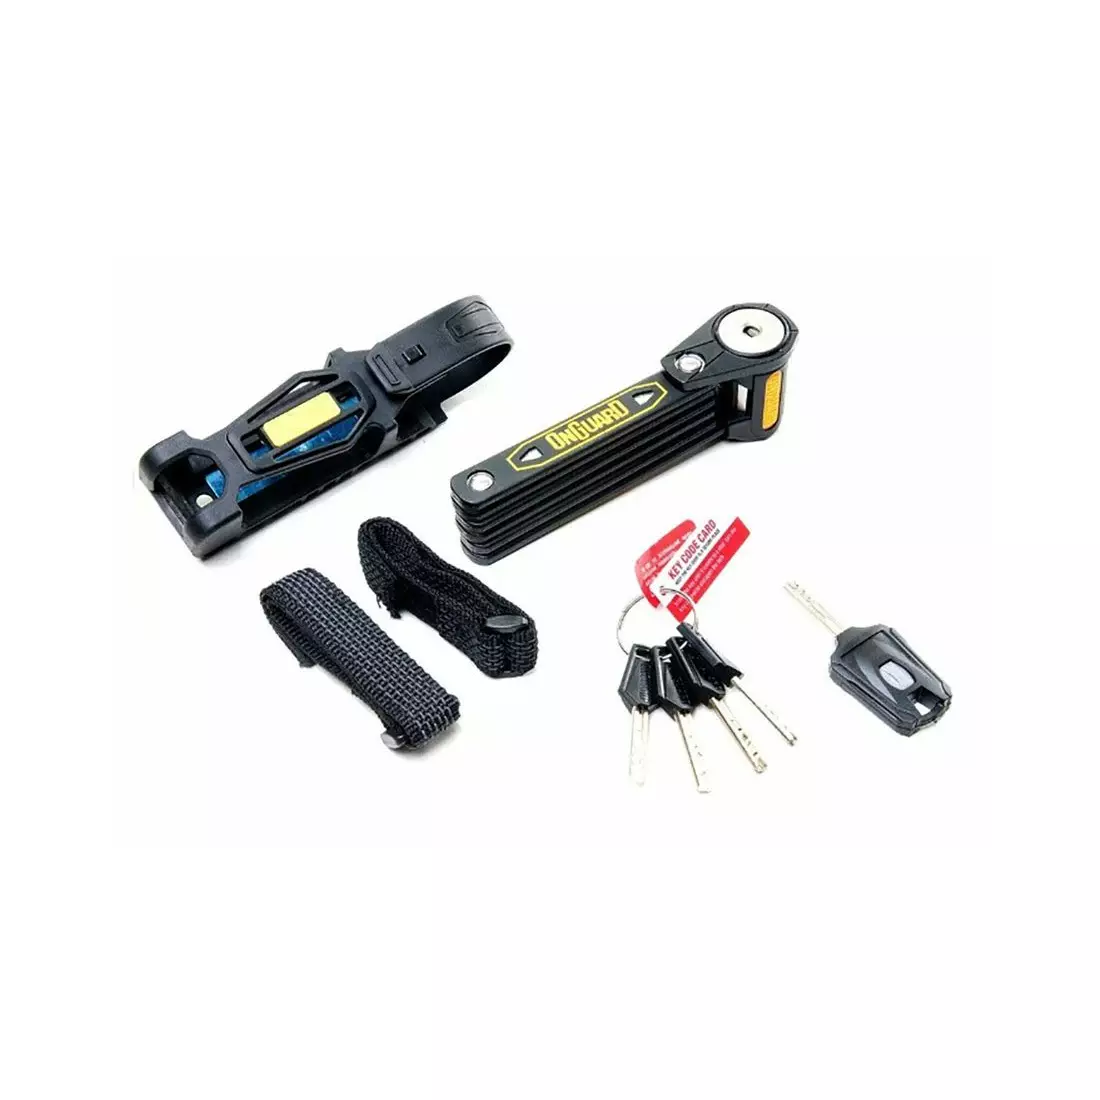 ONGUARD Bicycle clasp Heavy Duty Link Plate Lock K9 112,5cm - 5 x Keys with code ONG-8114 